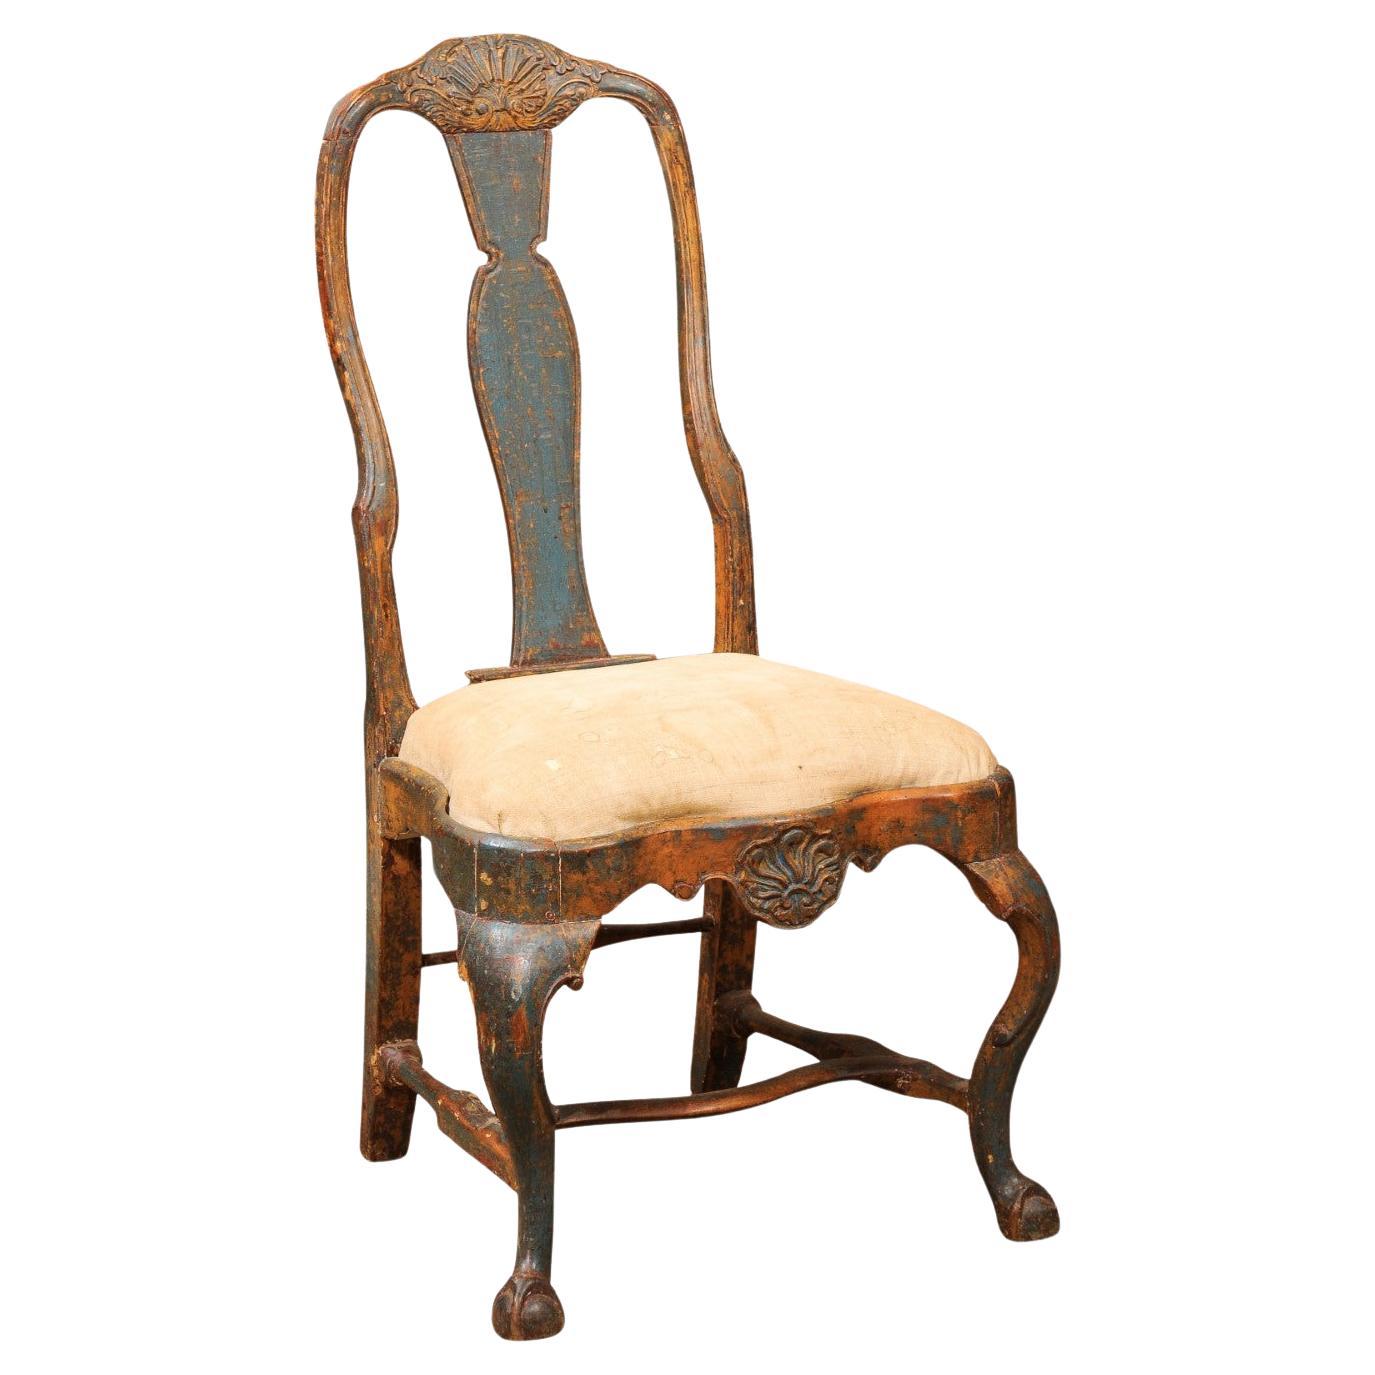 18th Century Swedish Painted Blue Side Chair with Shell Carving, Slip Seat